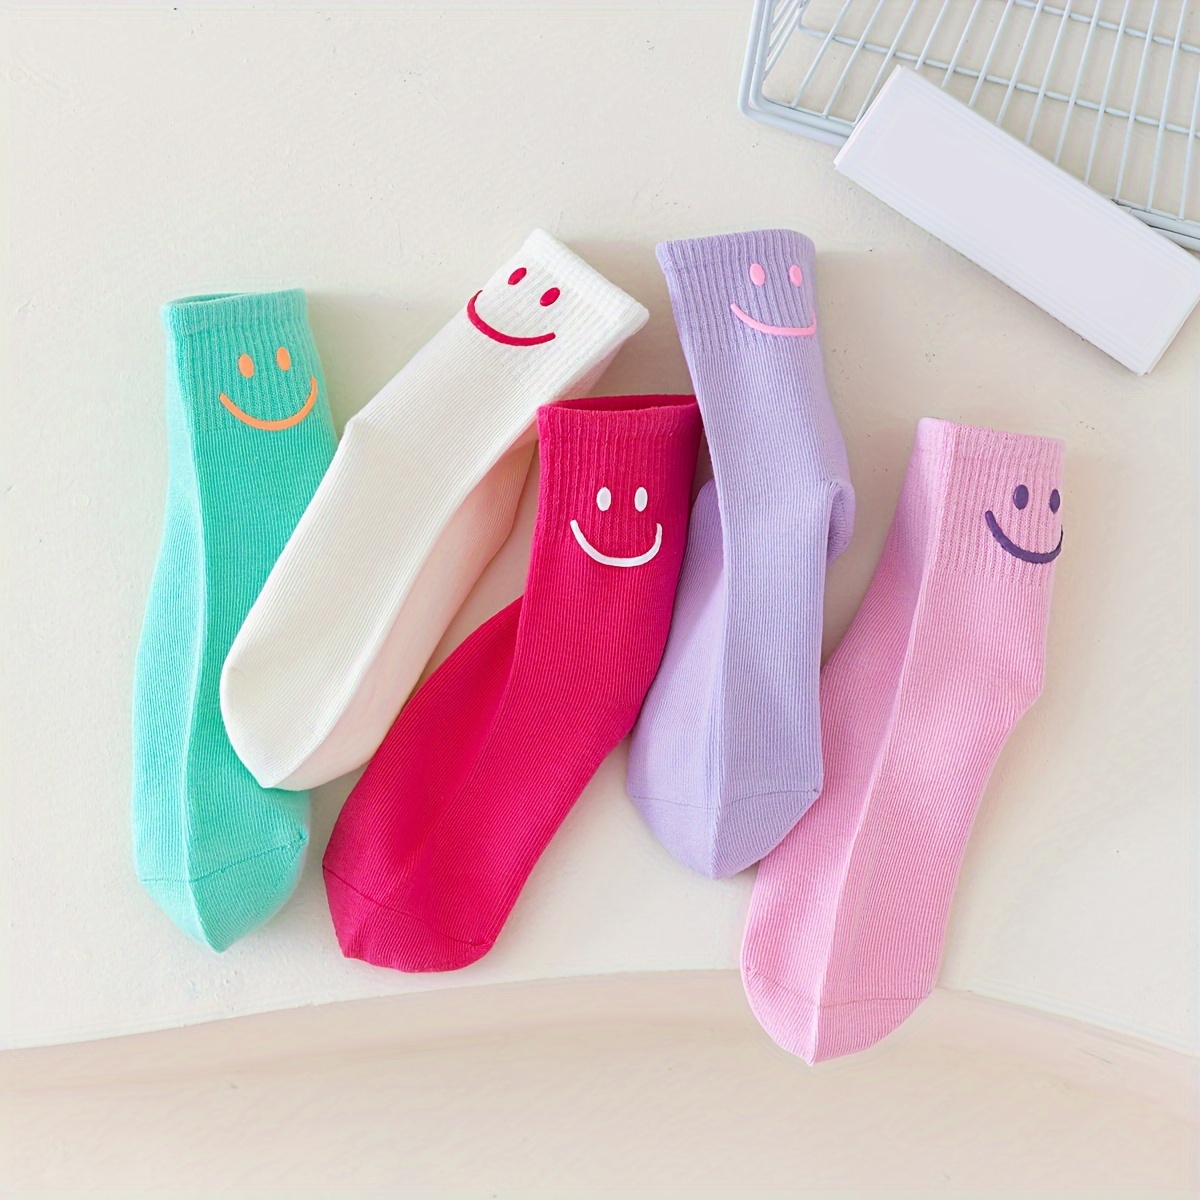 

5 Pairs Of Girl's Cartoon Happy Face Pattern Knitted Socks, Cotton Blend Comfy Breathable Soft Crew Socks For Outdoor Wearing